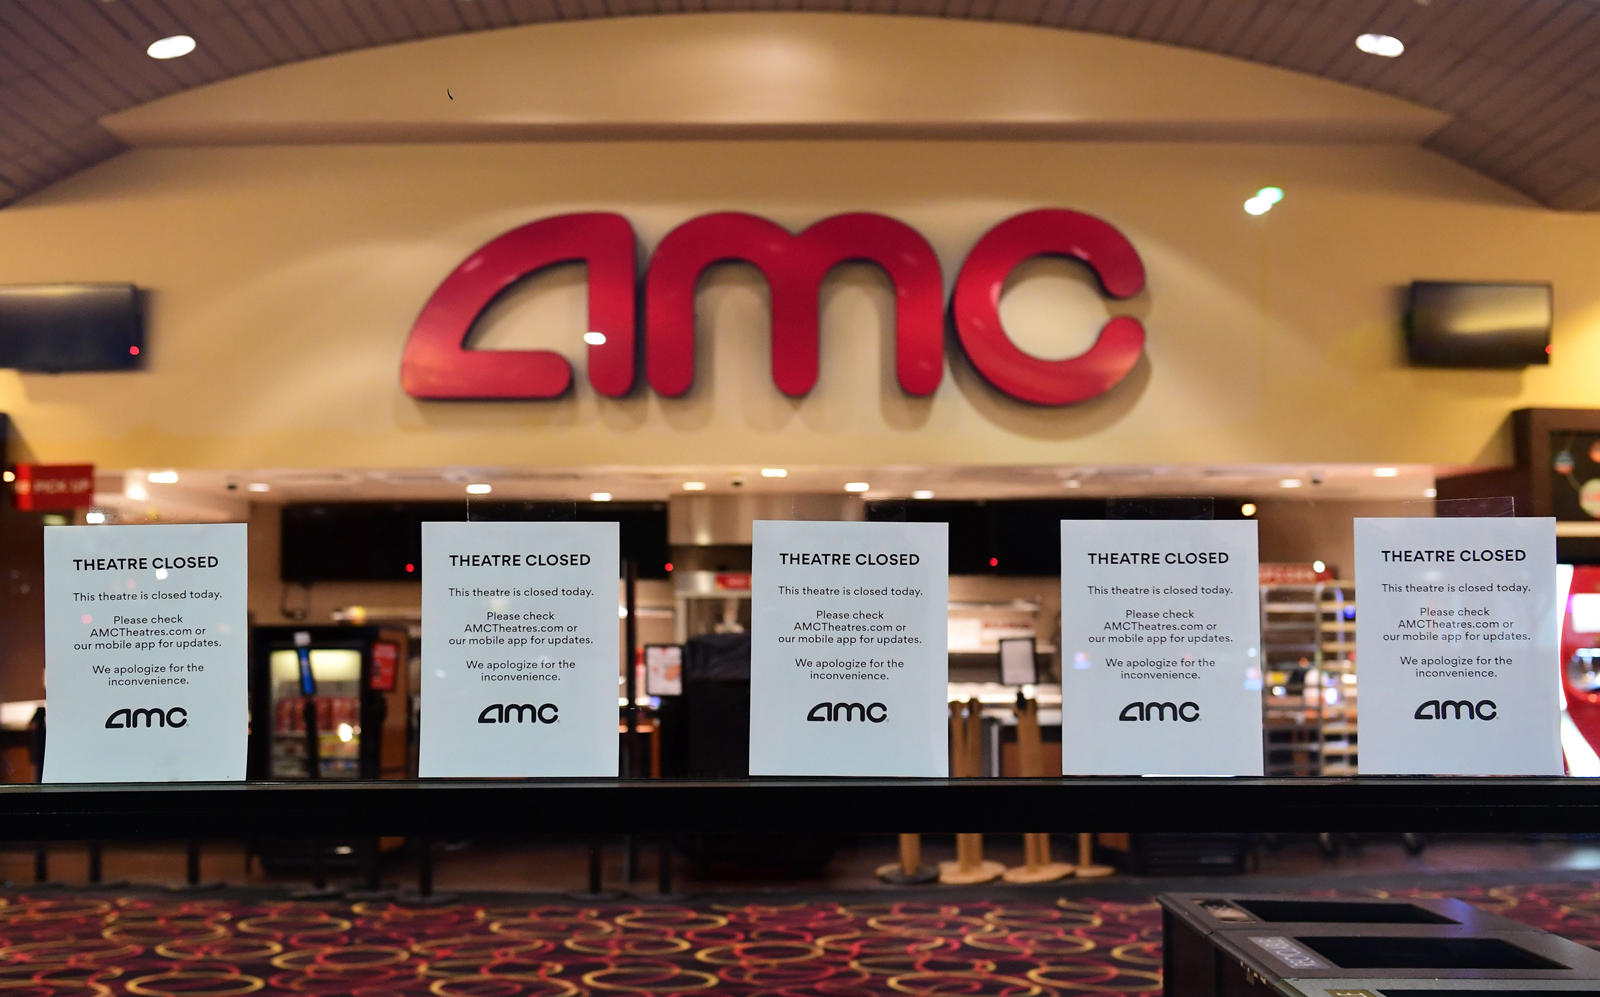 AMC is pressed to get eyes back in front of their screens starting in July — but not without some cuts ahead. (Getty)